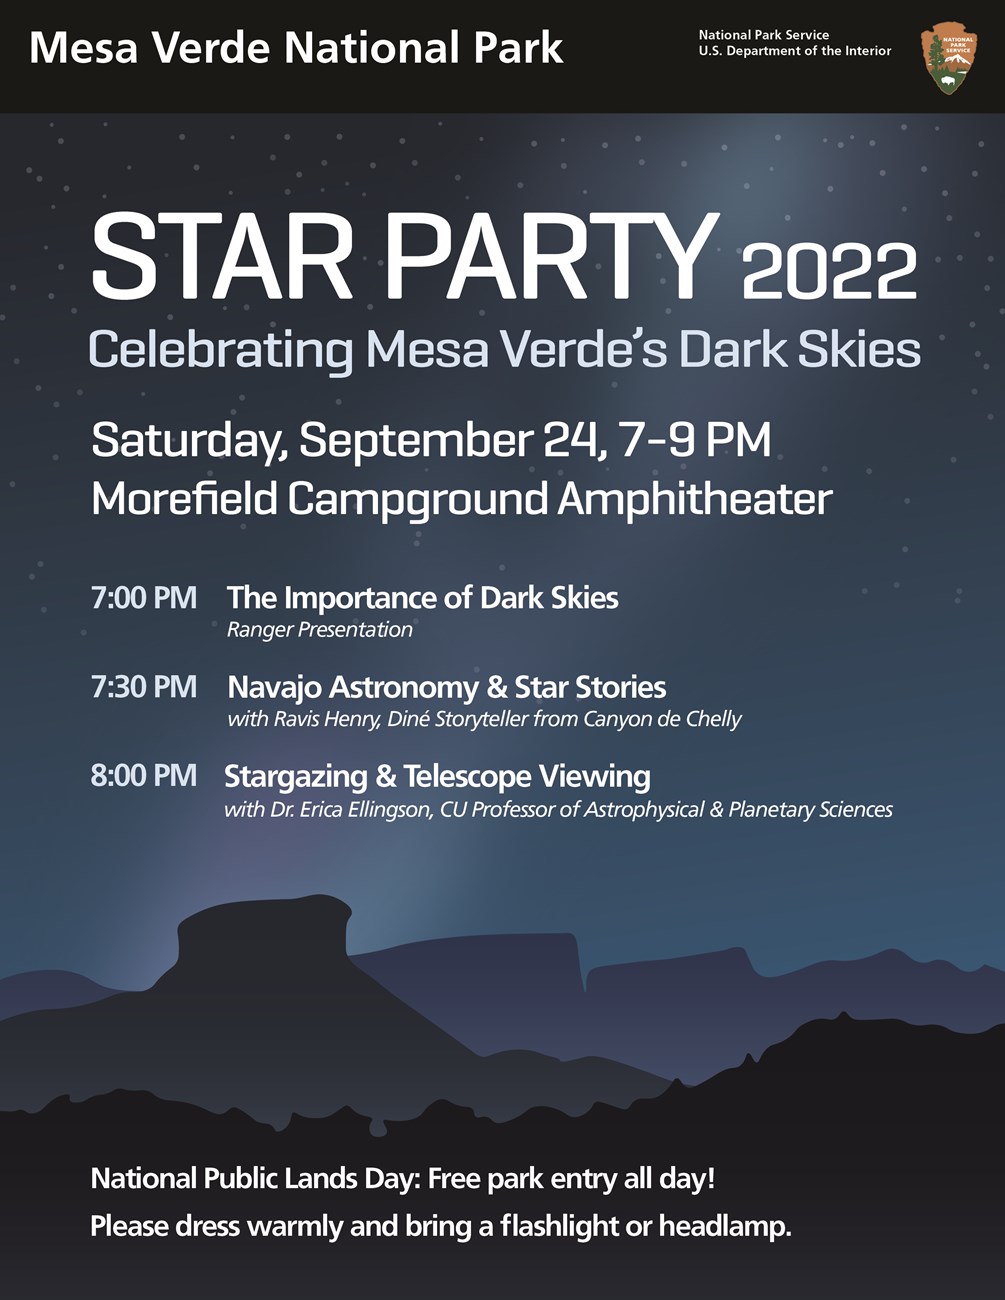 A flyer advertising the schedule of events for Mesa Verde Dark Sky Festival against a stylized blue background of the mesa by night.